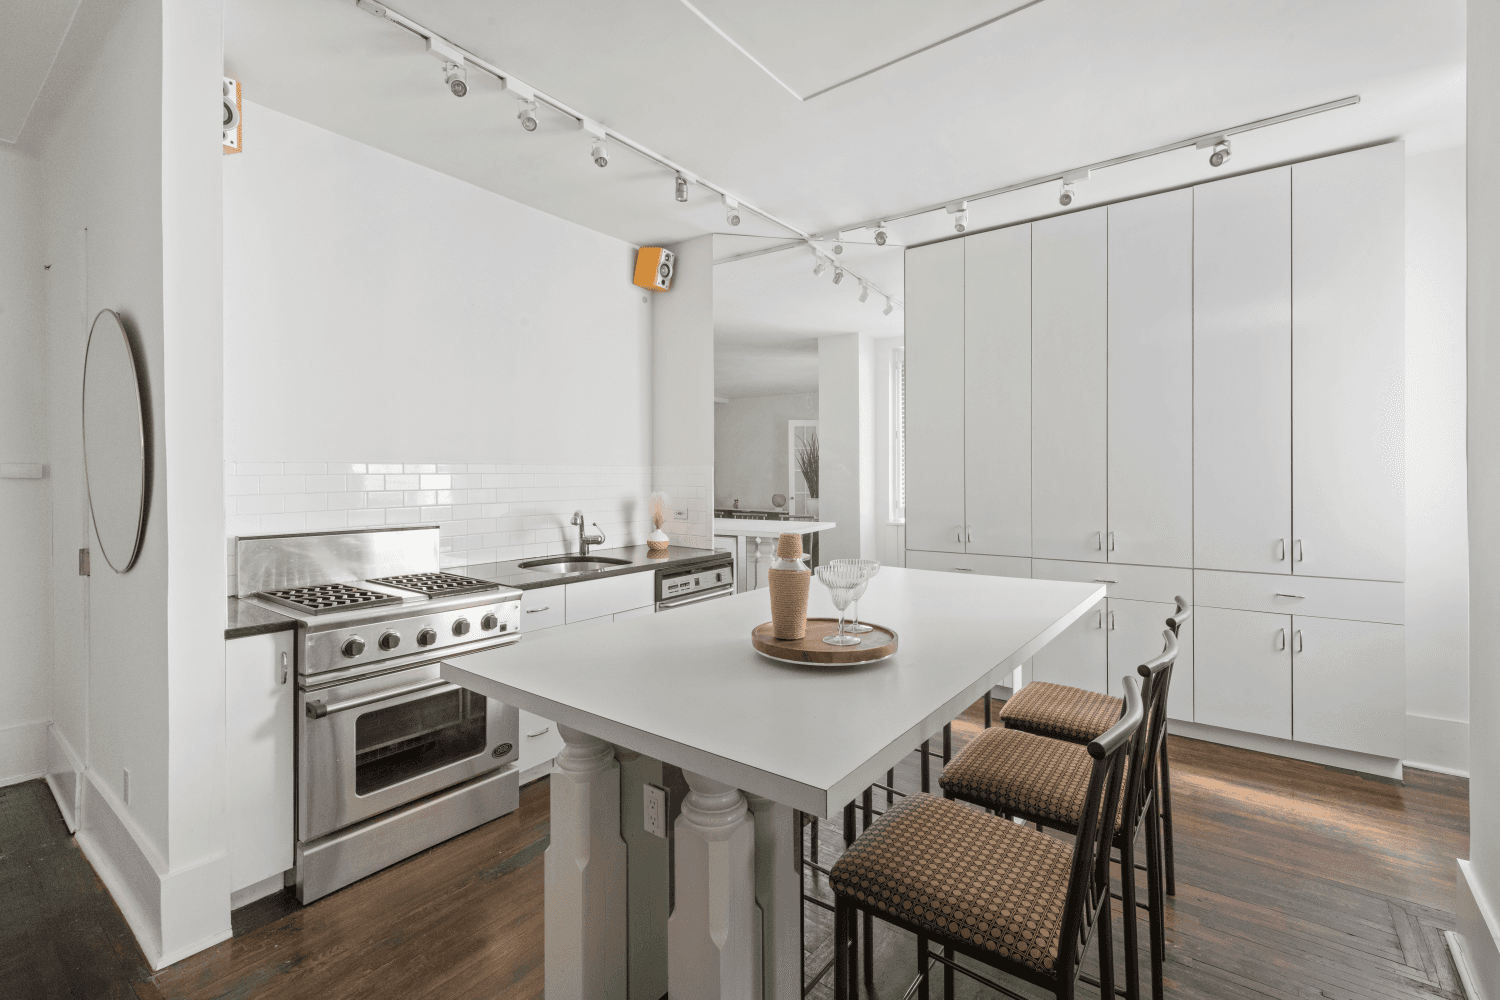 Nestled a block from Riverside Park in the heart of the Upper West Side, this lovely 1 bedroom, 1 bathroom co op is a portrait of modern pre war charm.